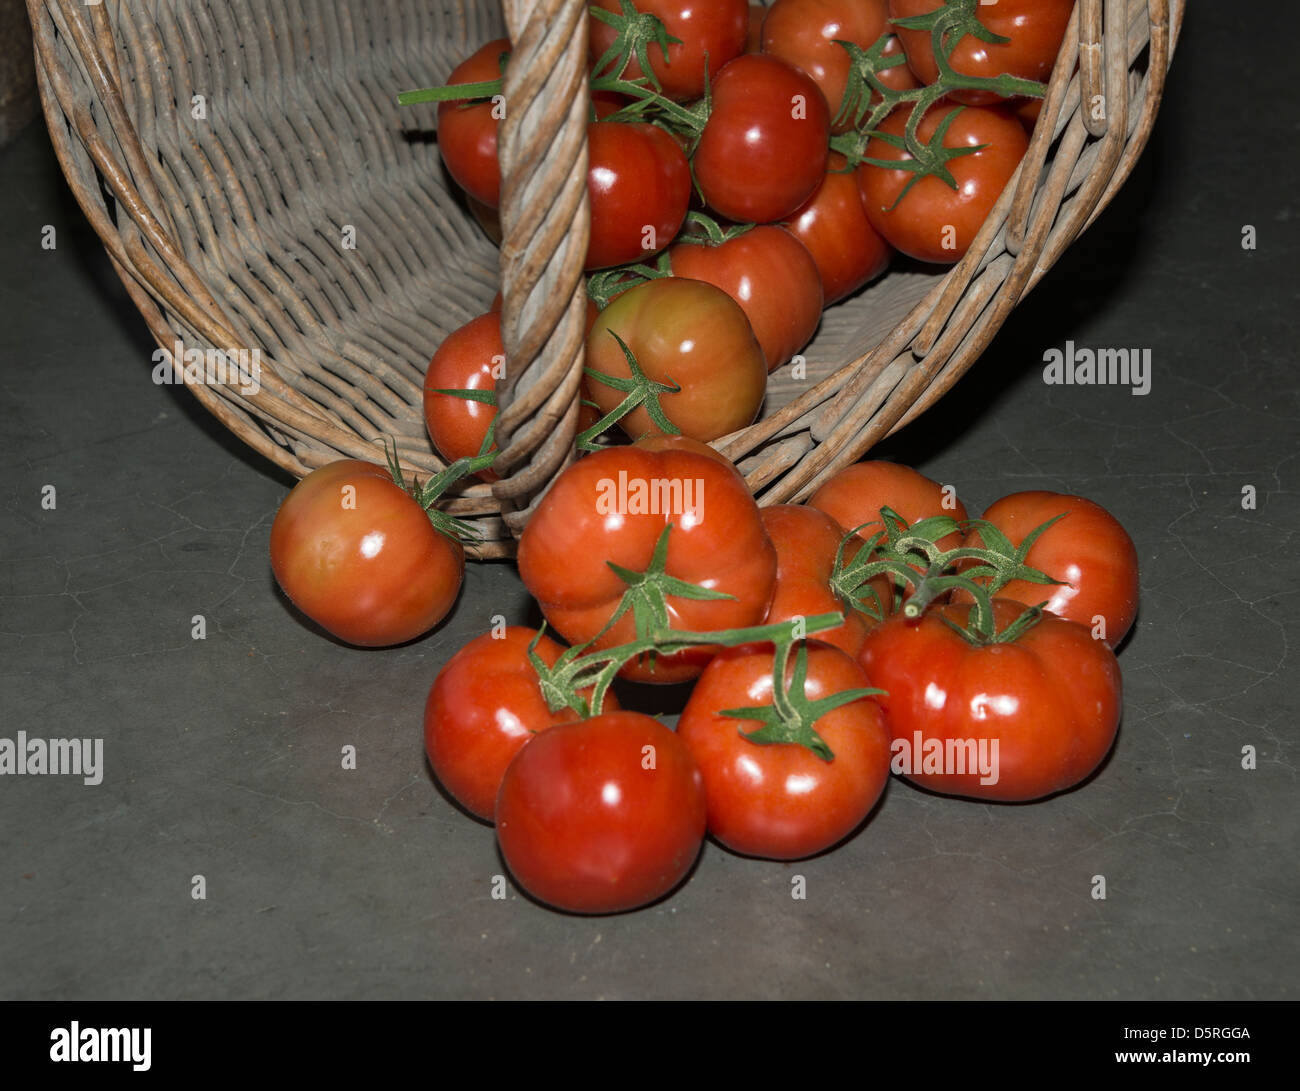 rattan basket with red tomato Stock Photo